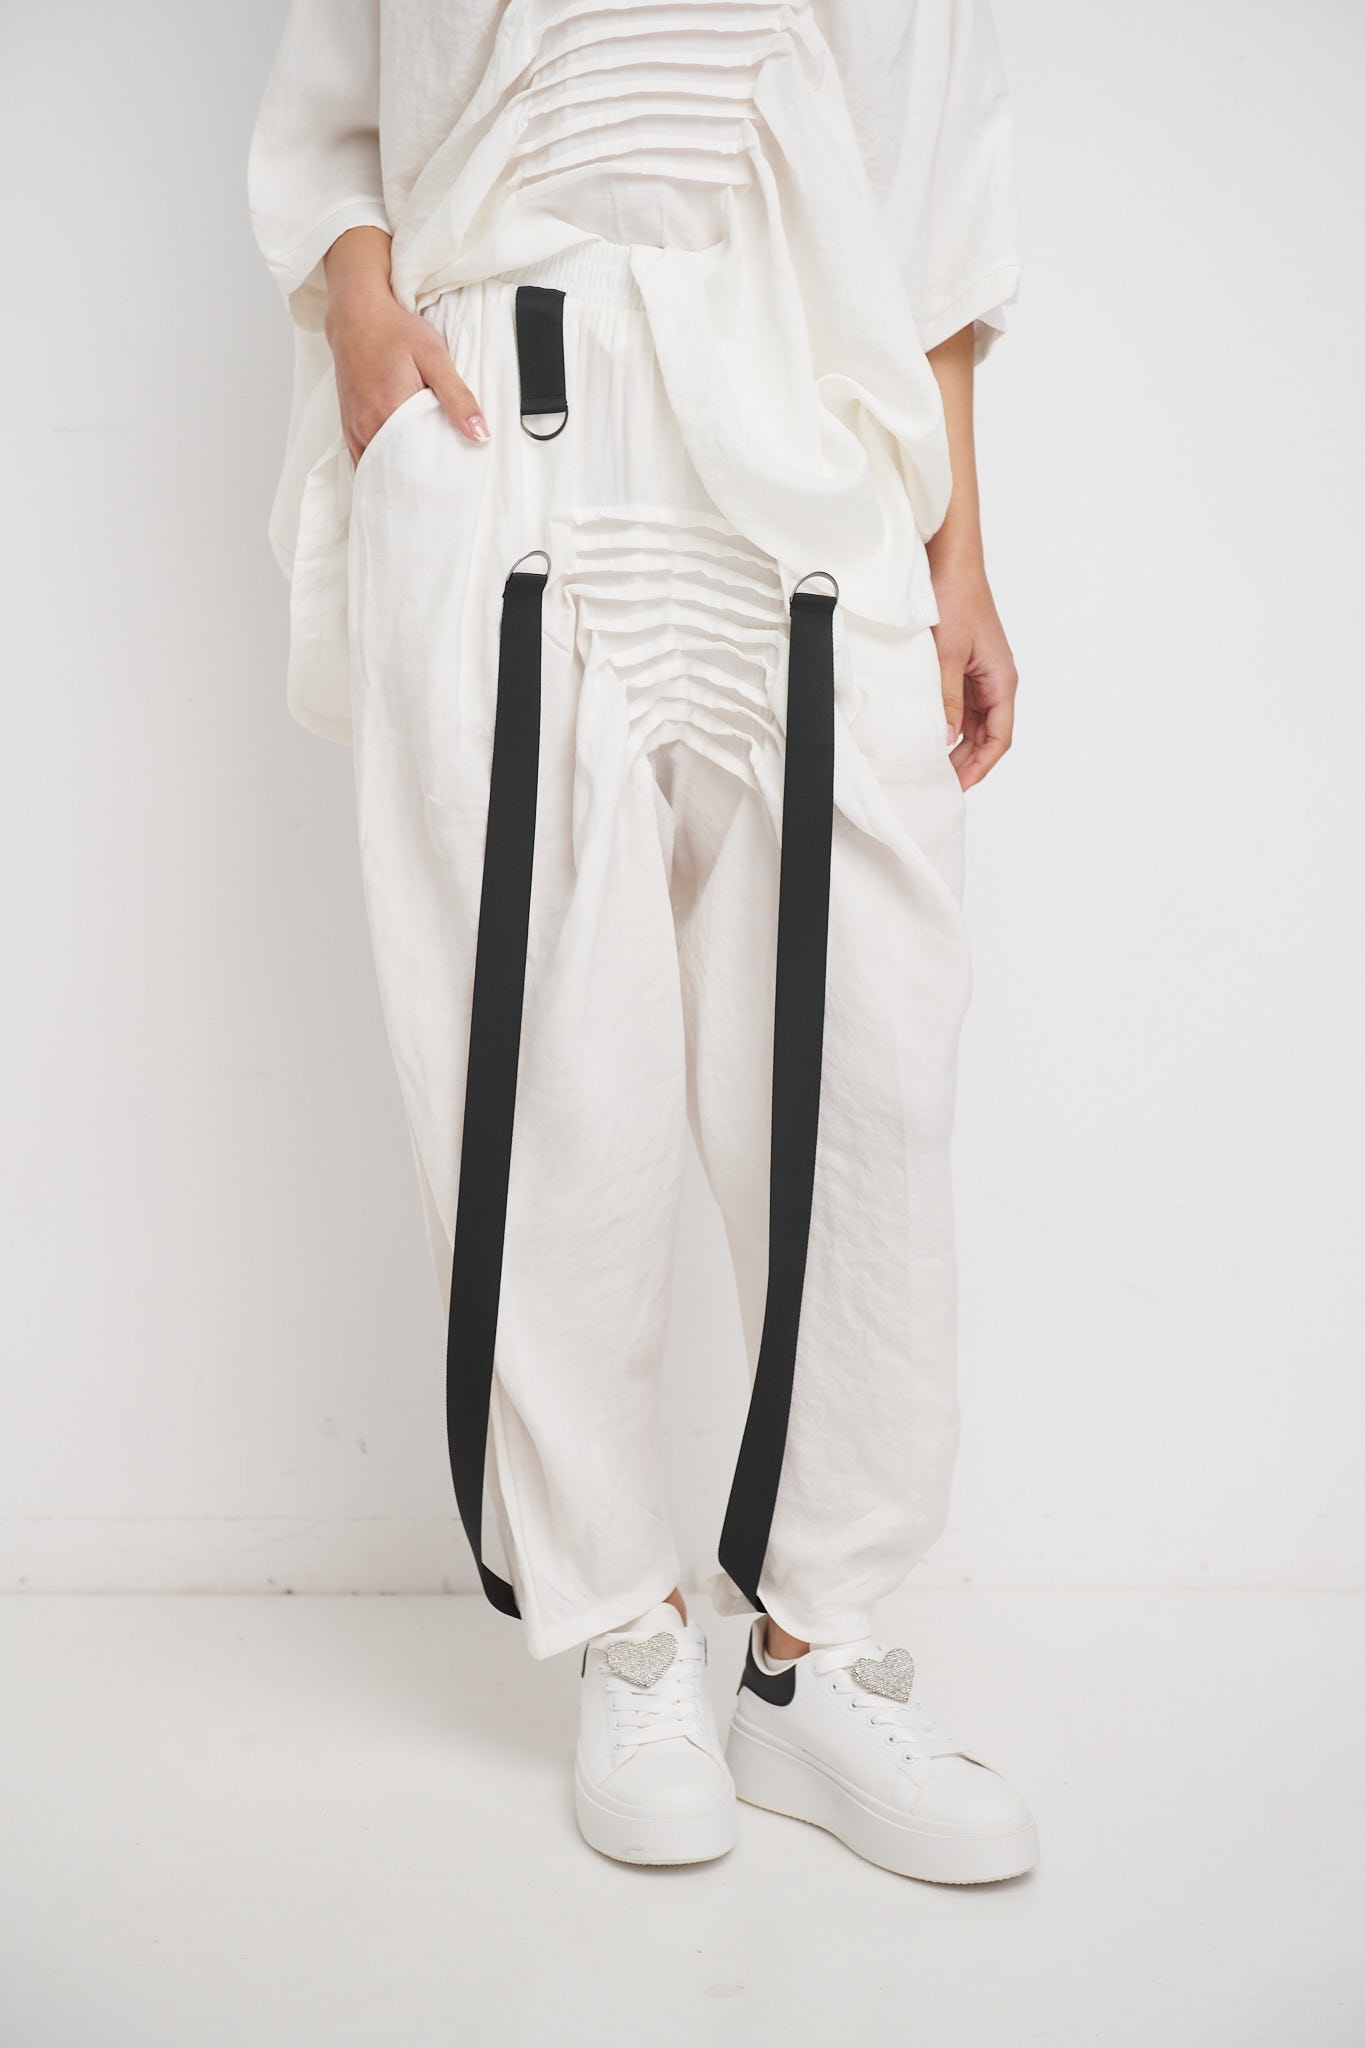 Baggy Pants With Hanging Belts